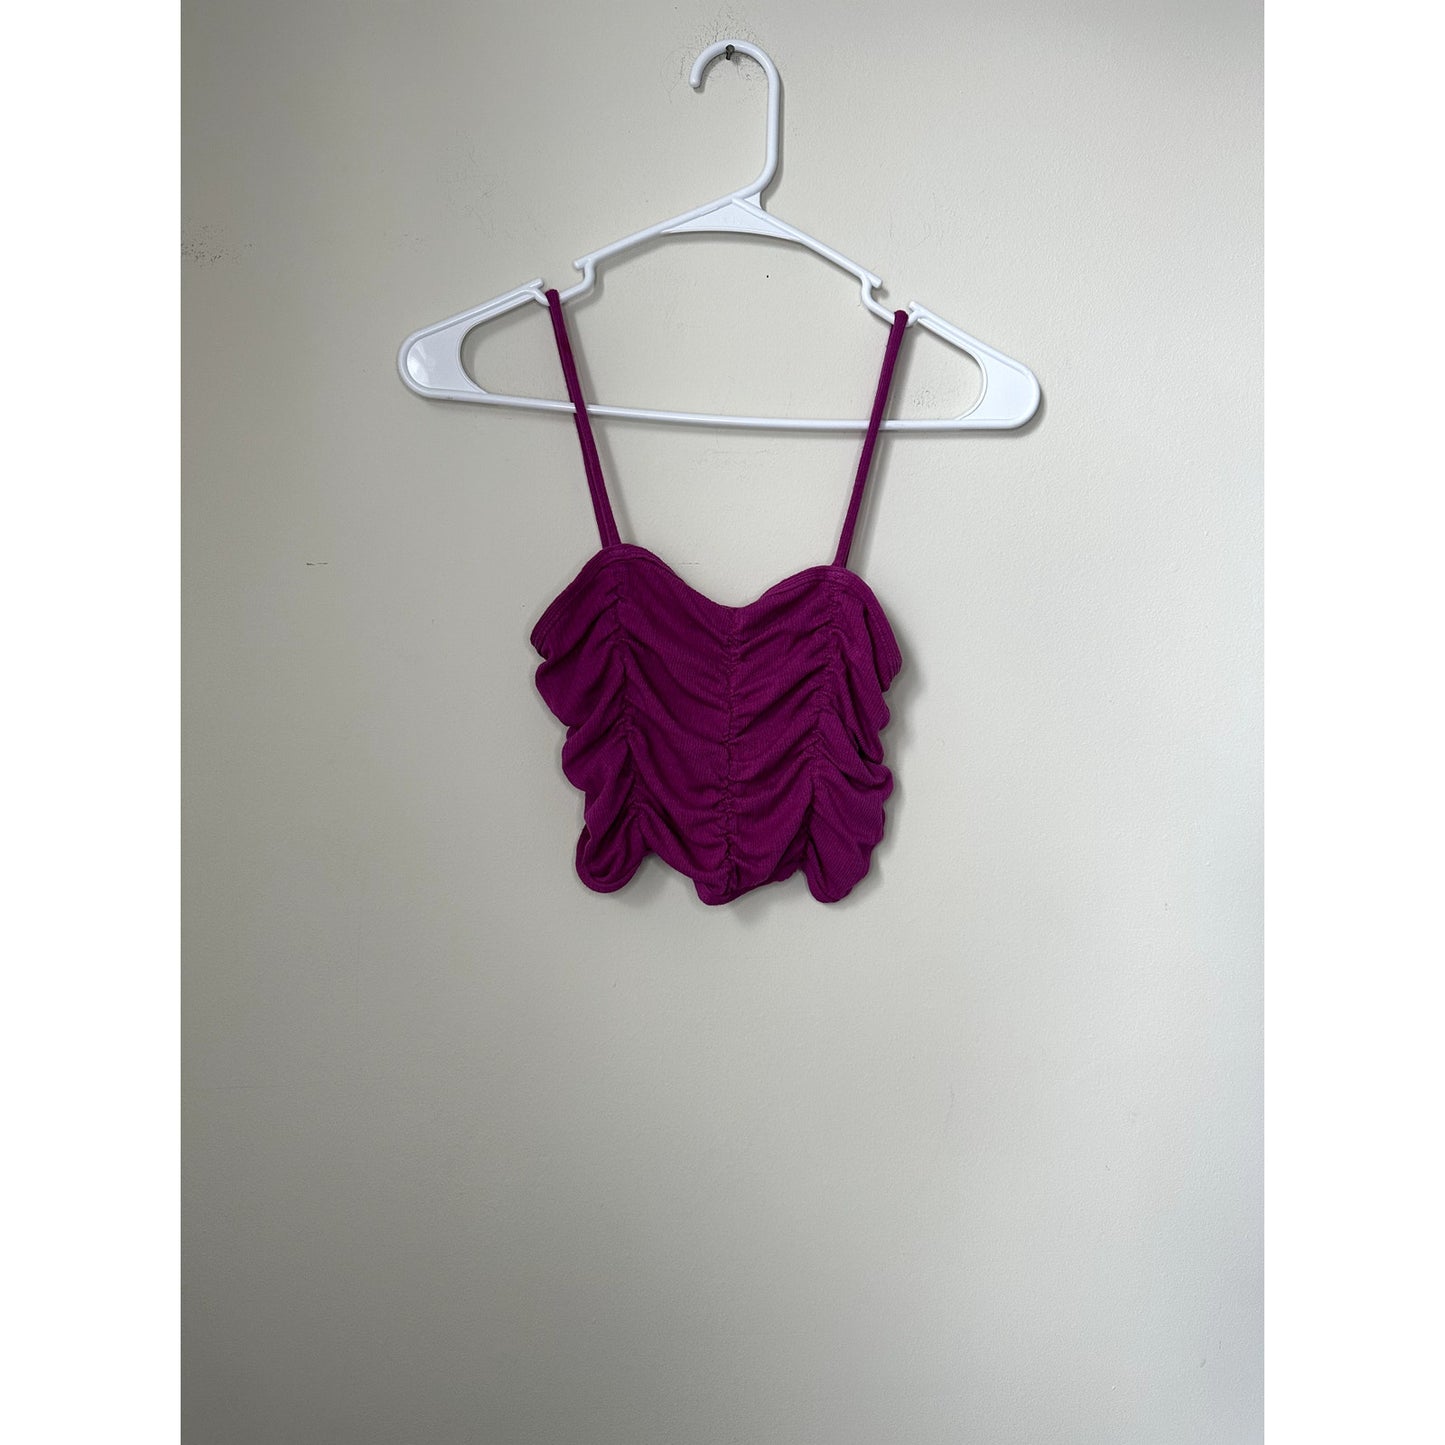 Urban Outfitters Ruched Purple Crop Top, Size M